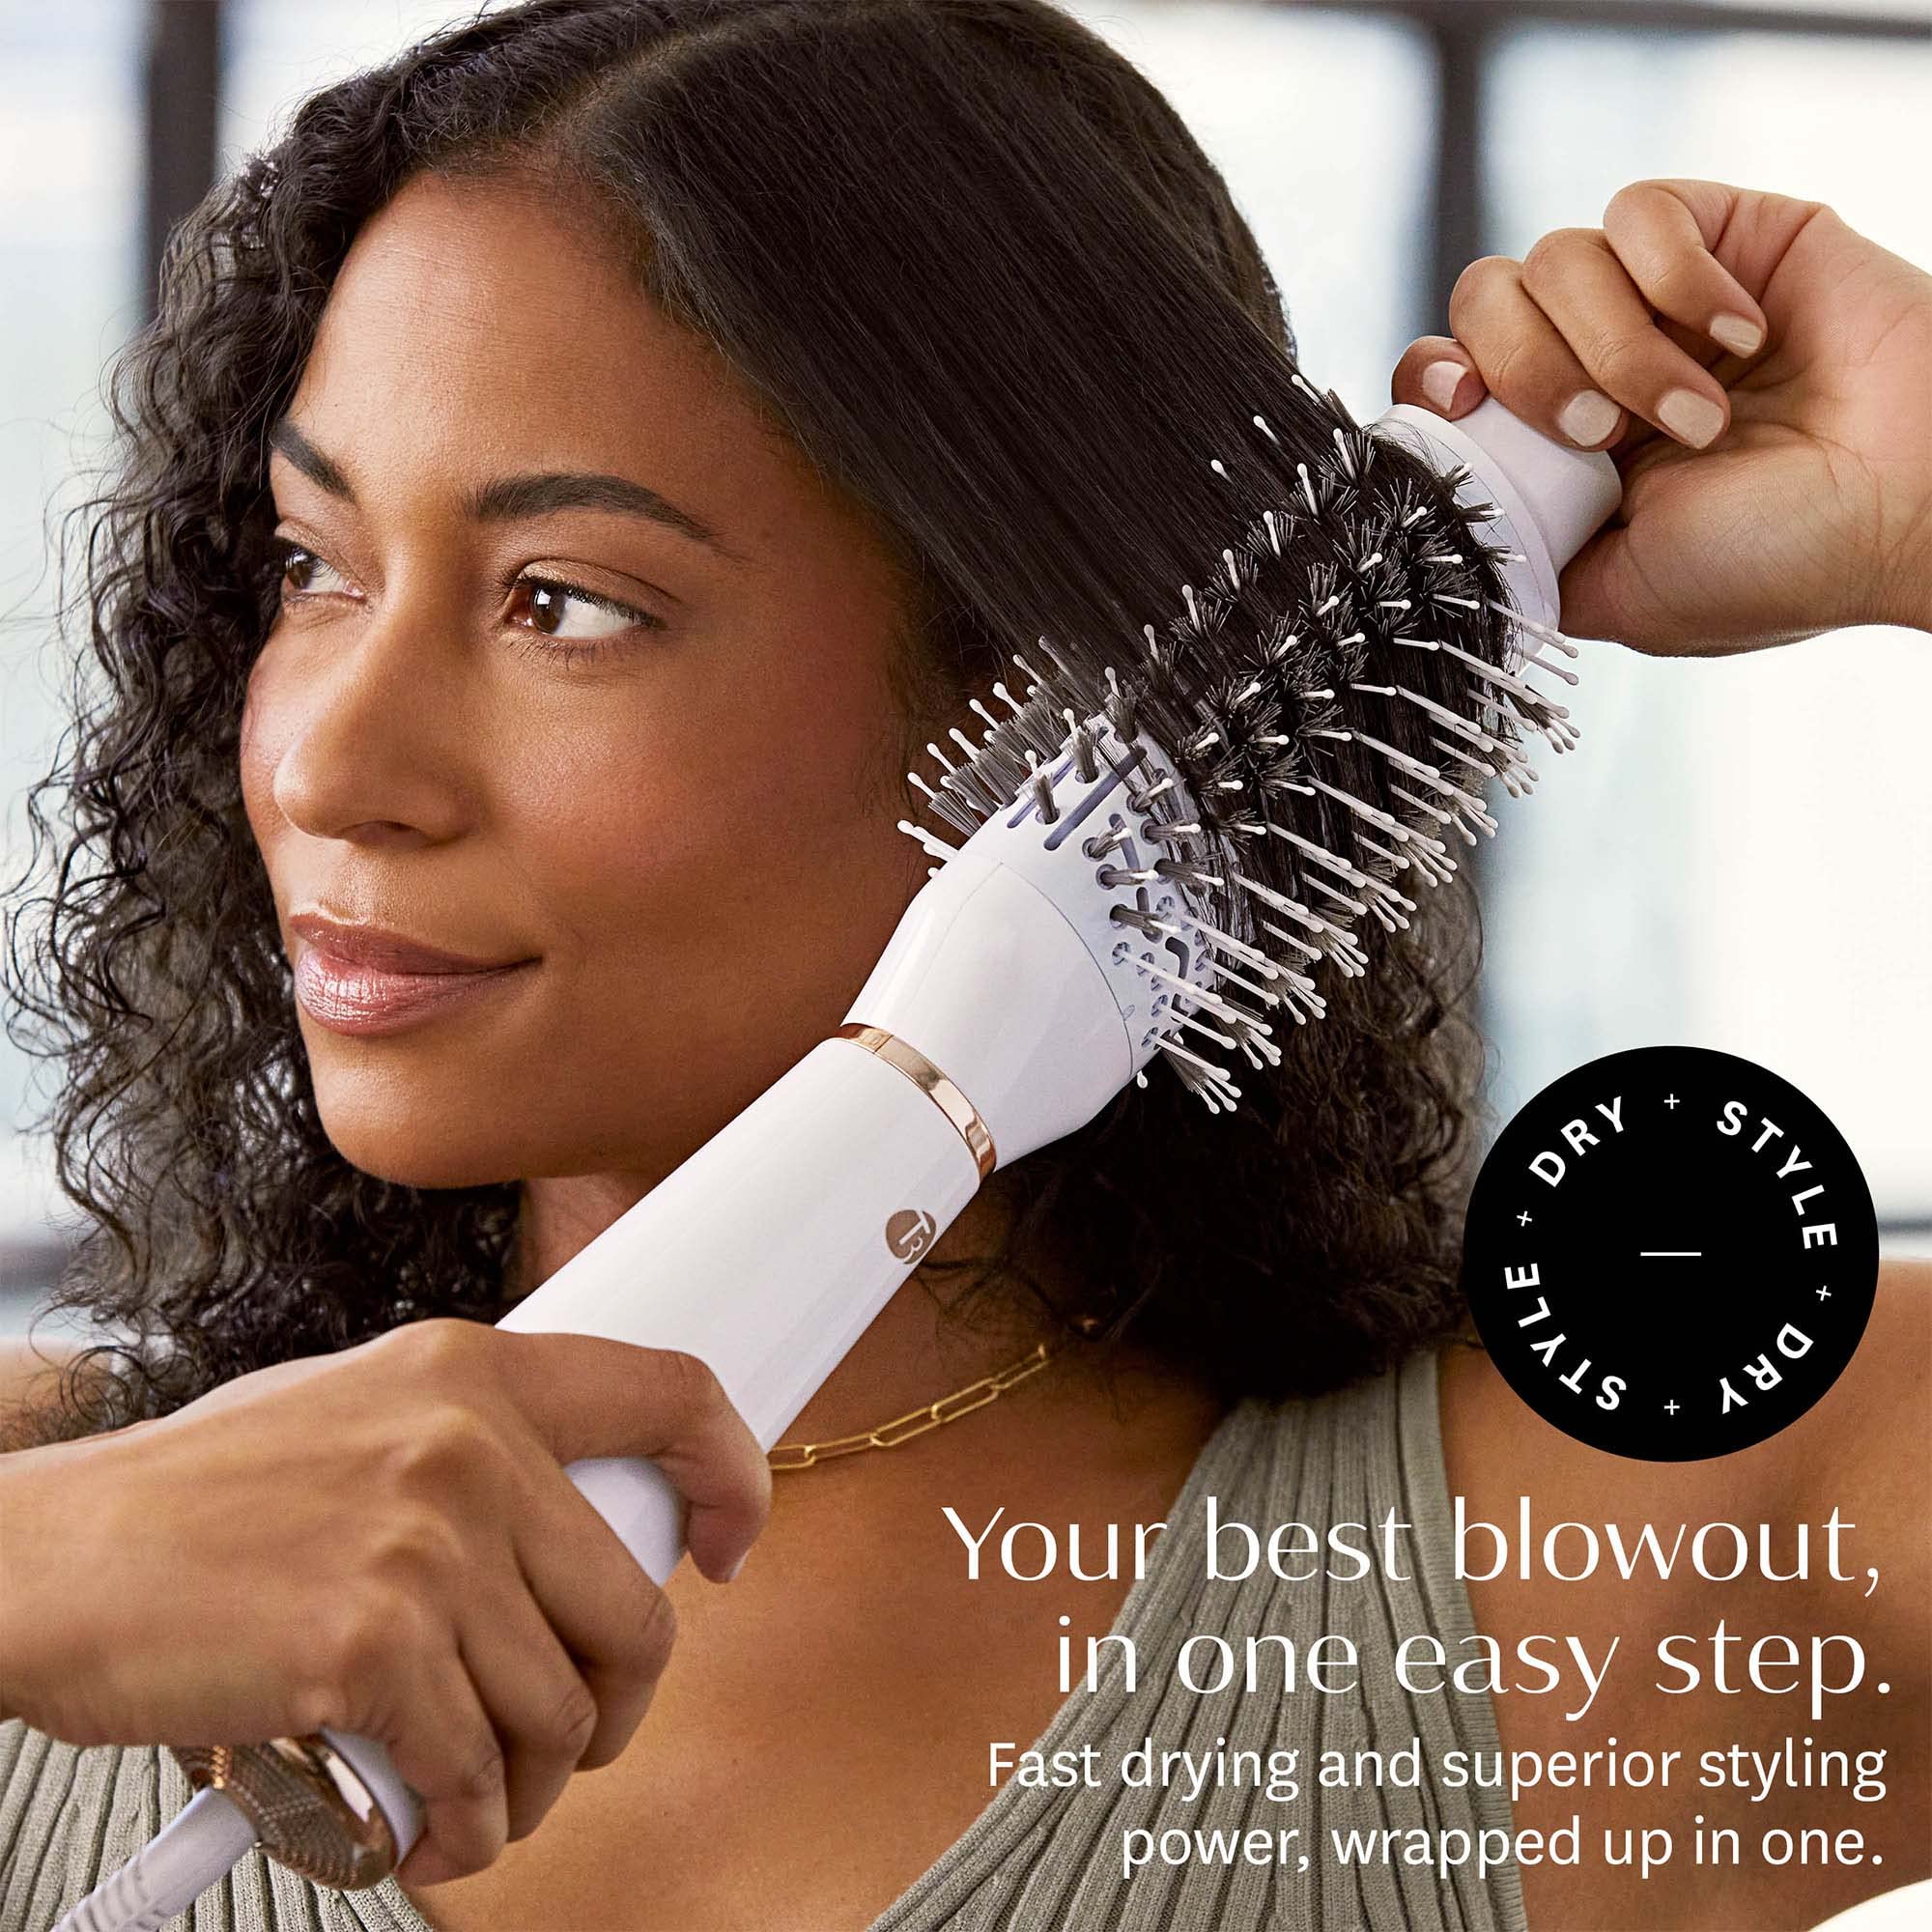 T3 AireBrush One-Step Smoothing and Volumizing Hair Dryer Brush, Blow Dryer Brush for Fast Drying and Styling with Multiple Heat and Speed Settings, Ceramic Oval Brush and Cool Shot